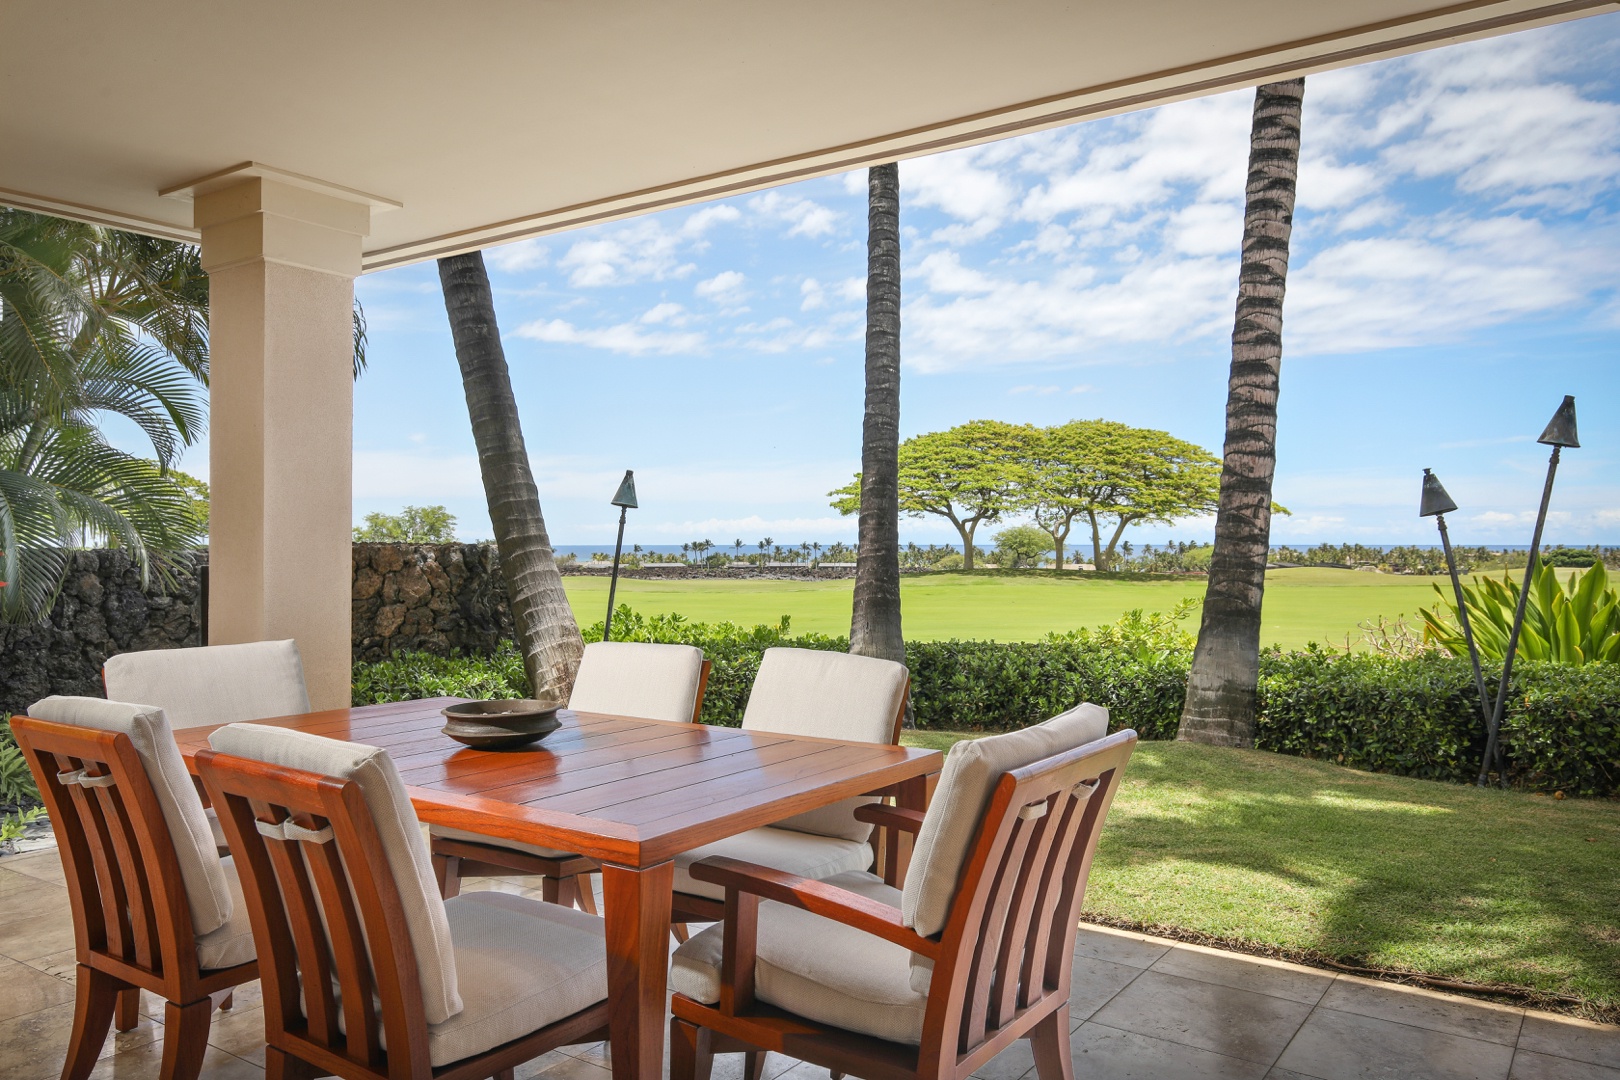 Kailua Kona Vacation Rentals, 4BD Pakui Street (147) Estate Home at Four Seasons Resort at Hualalai - Enjoy breakfast al fresco or barbecue into the sunset and fire up the tiki torches.